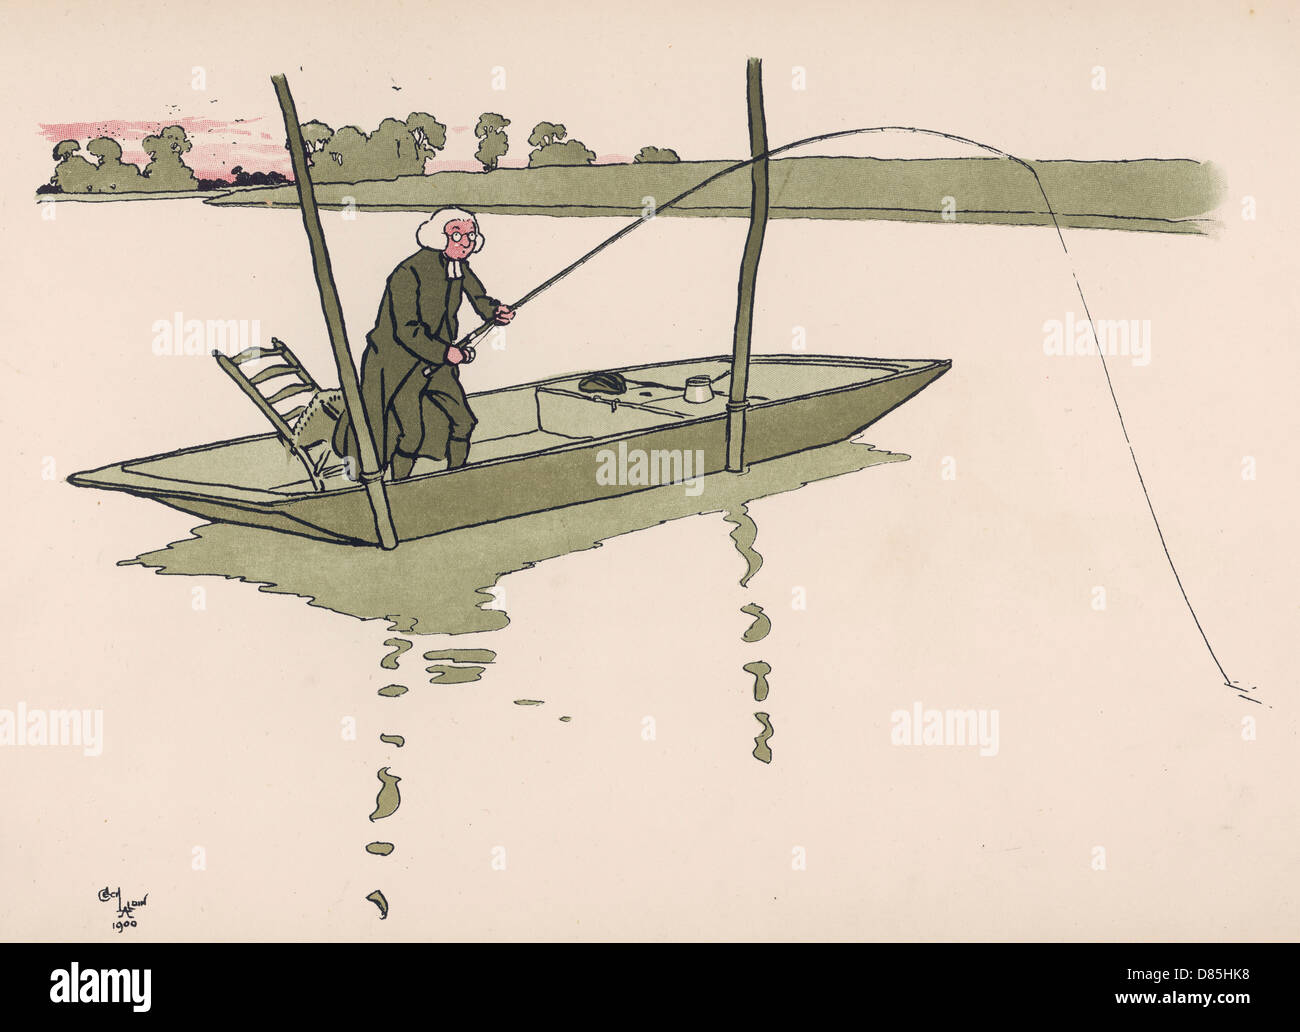 Clergyman fishing from a boat Stock Photo